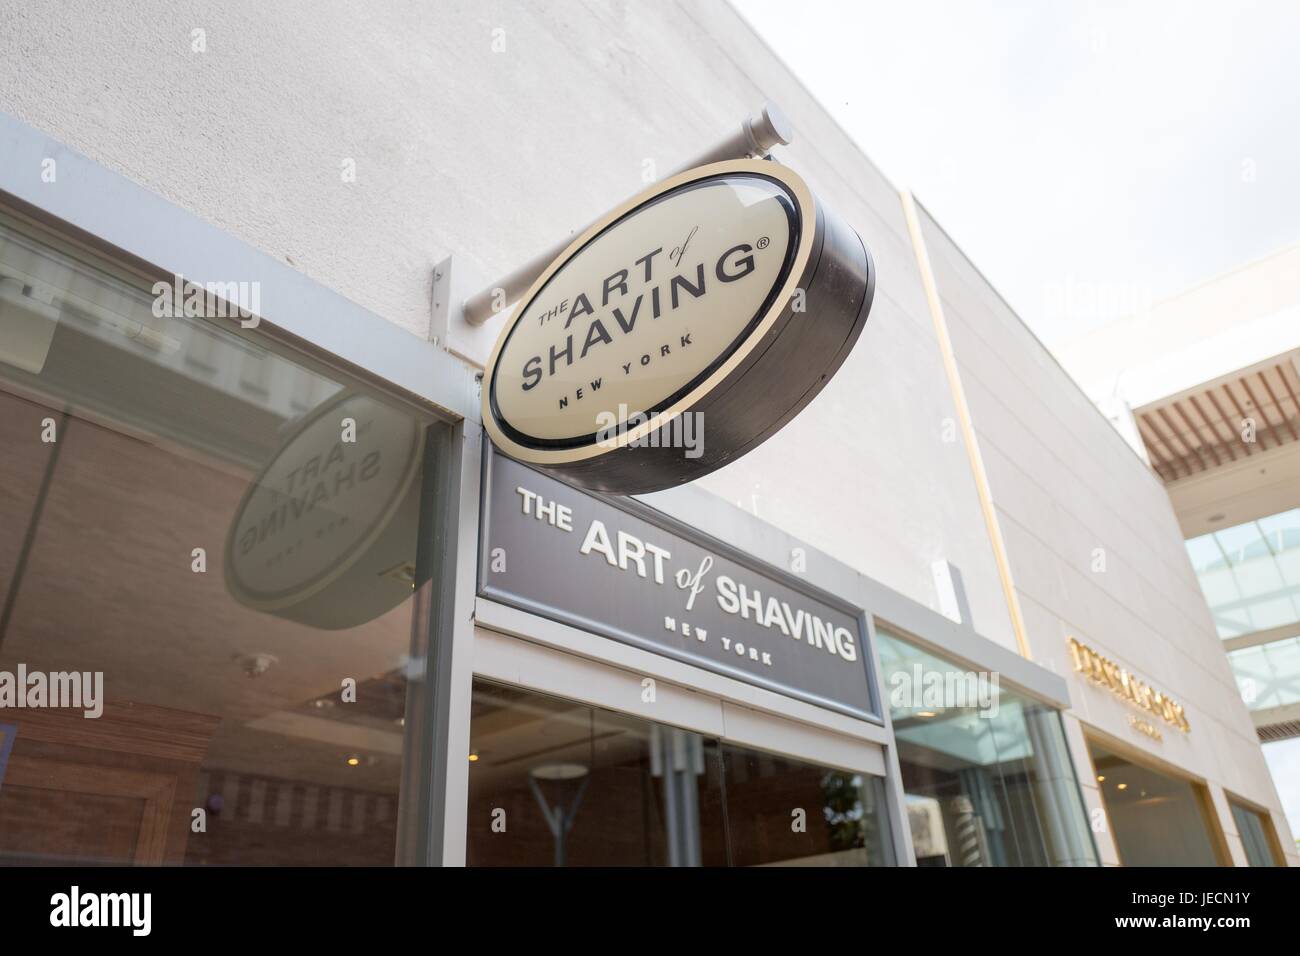 The Art of Shaving, a retail store devoted to luxury razors and other shaving products, at the Stanford Shopping Center, an upscale outdoor shopping mall in the Silicon Valley town of Stanford, California, April 7, 2017. Stock Photo